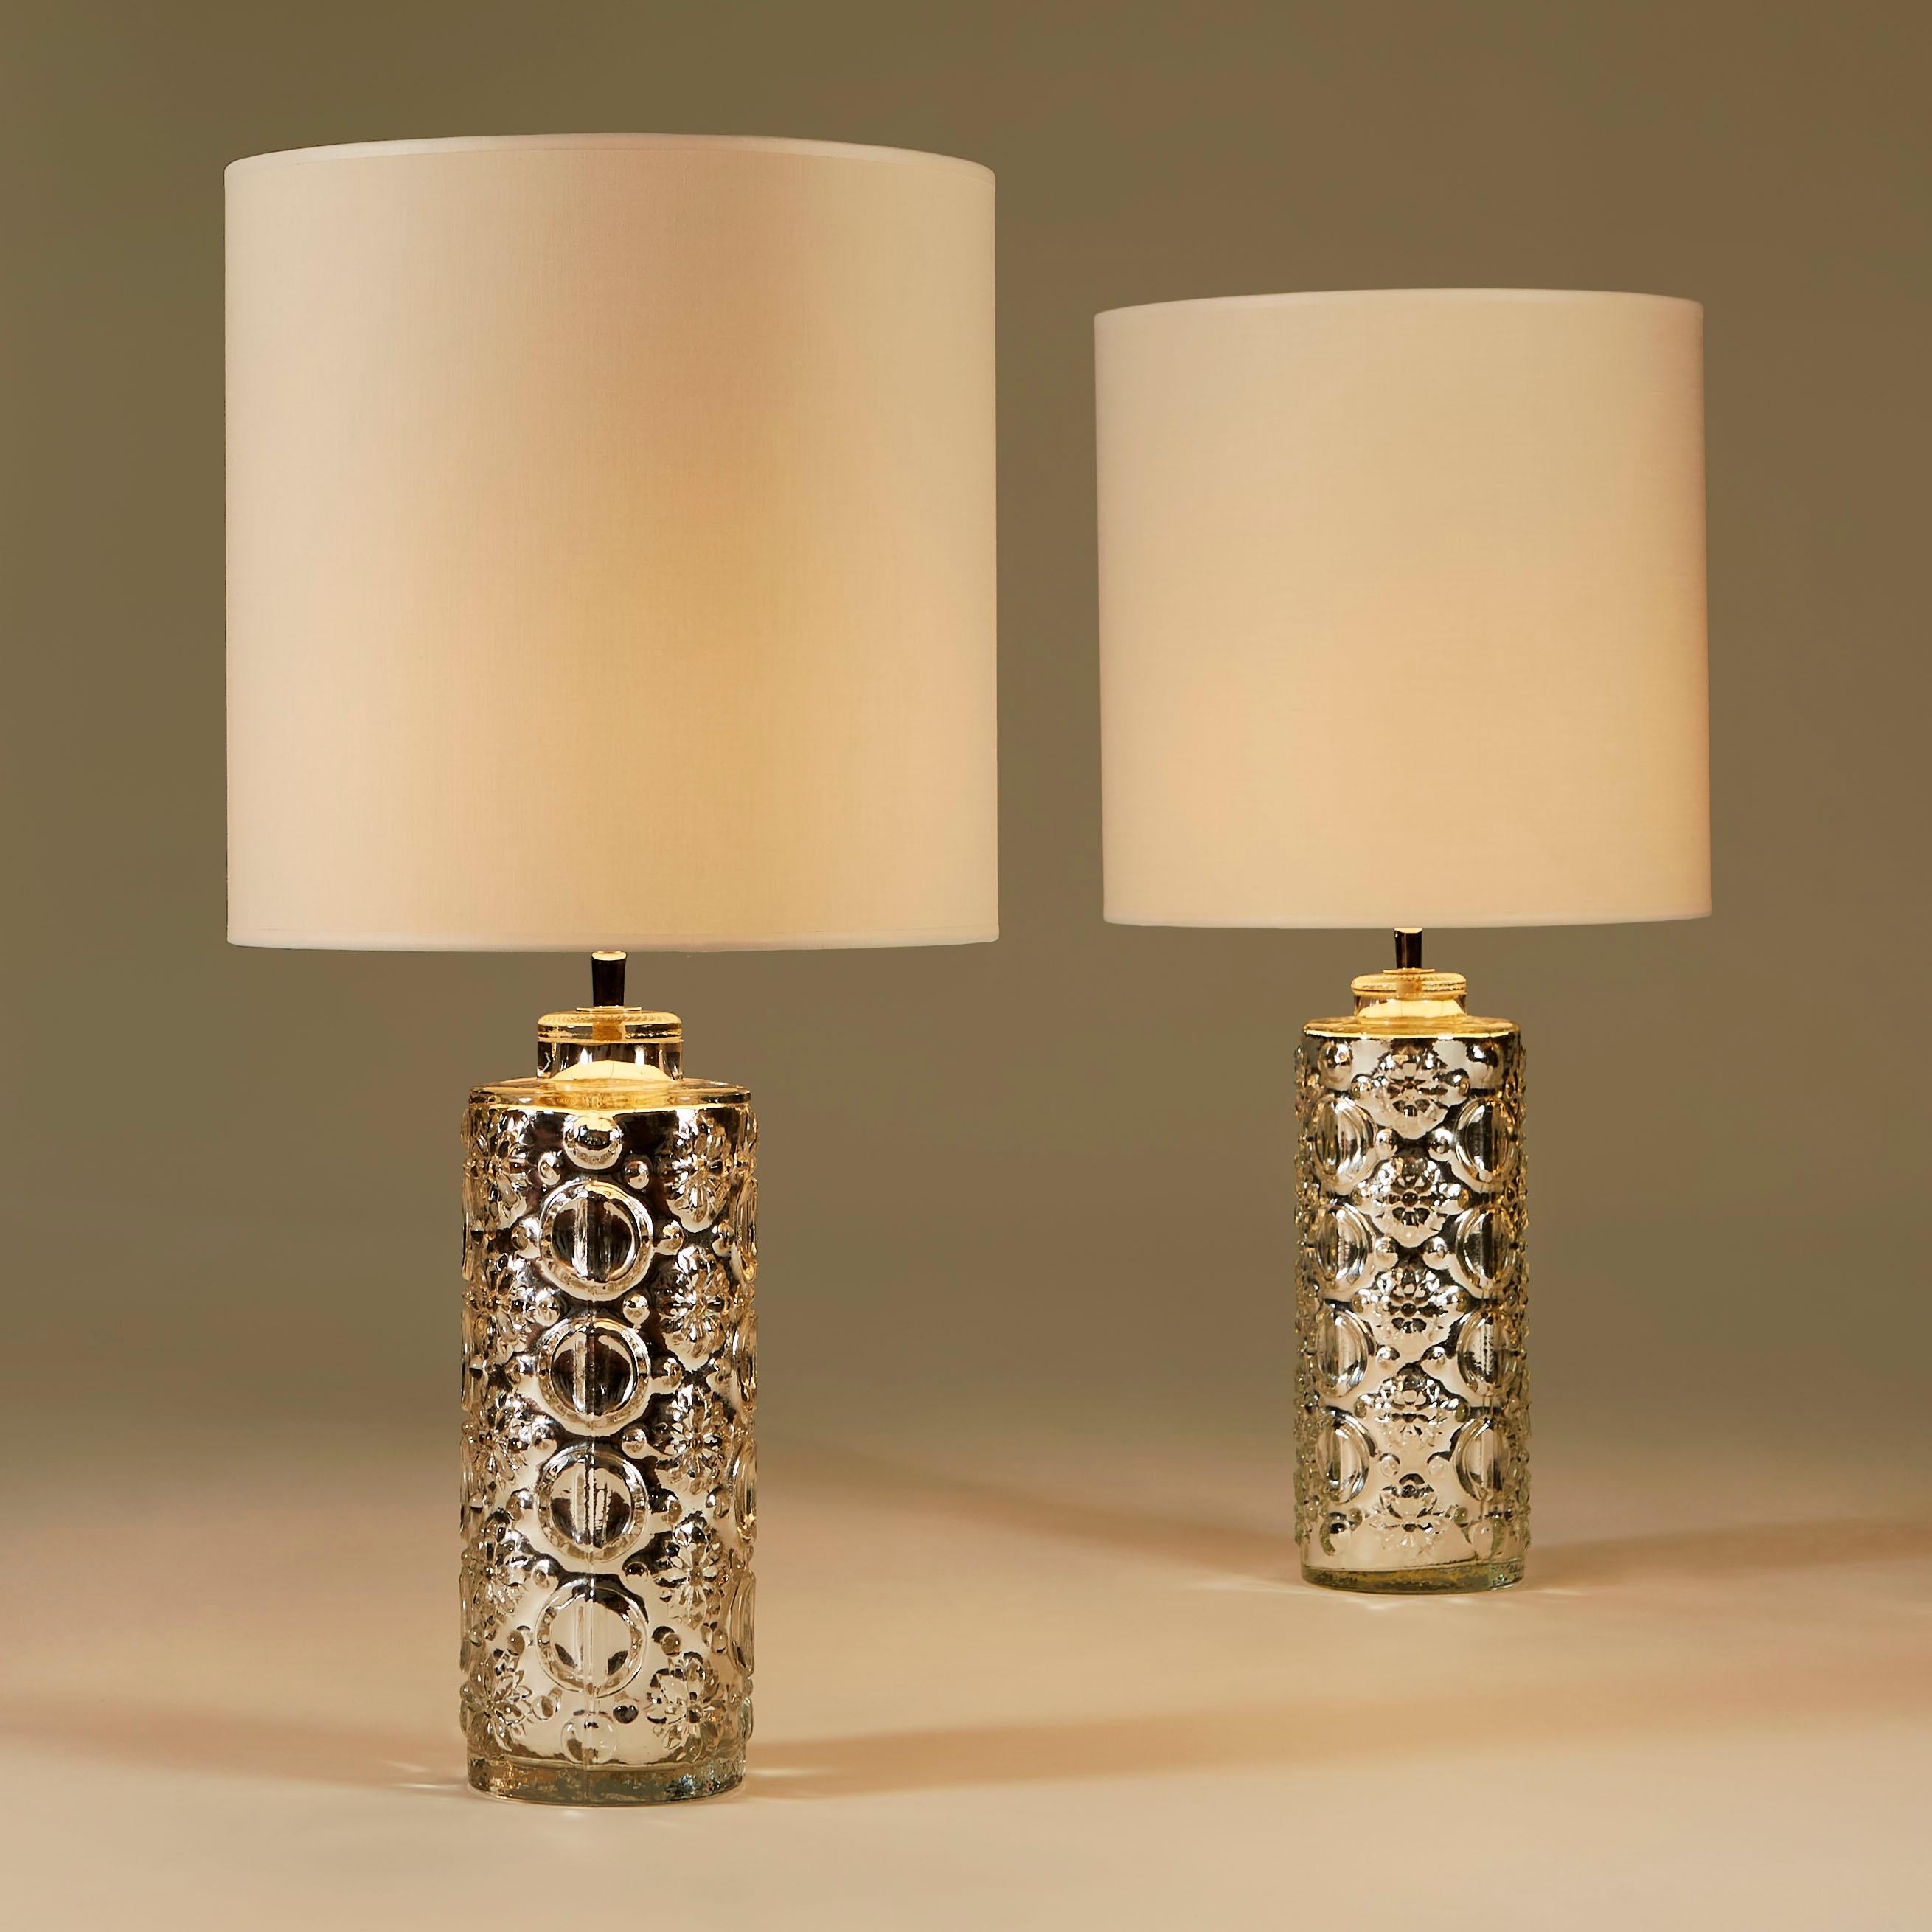 Glamorous pair of decorative silver table lamps by Swedish glasswork company Orrefors. Custom lampshades included.

Measures: Height excluding shade 45cm.